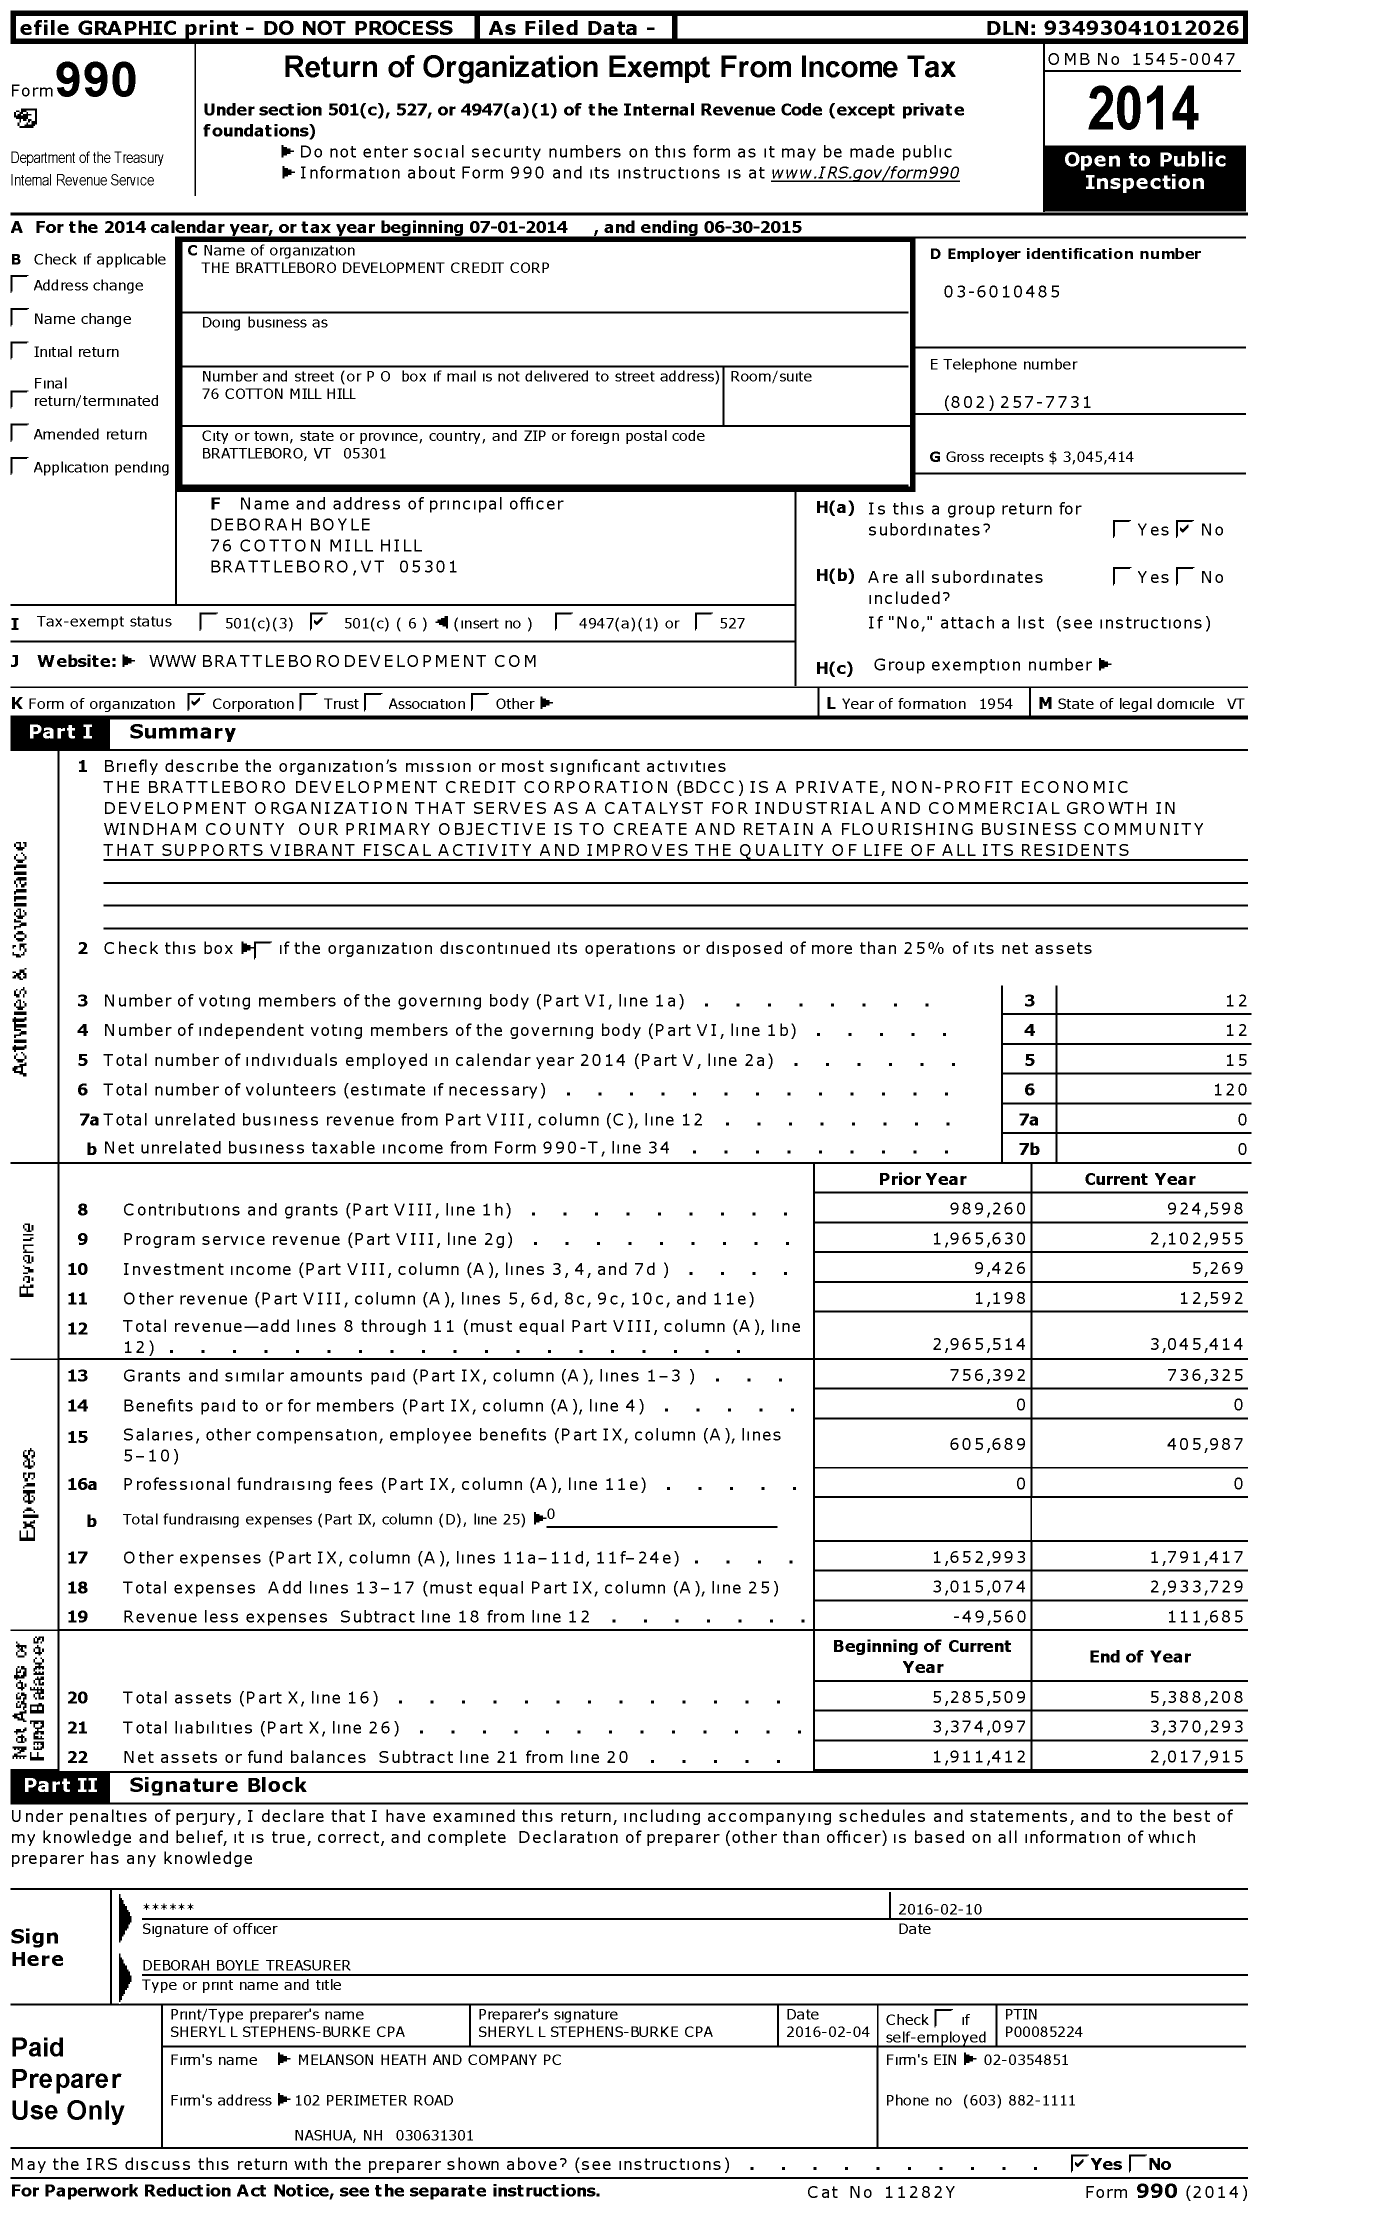 Image of first page of 2014 Form 990O for Brattleboro Development Credit Corporation (BDCC)